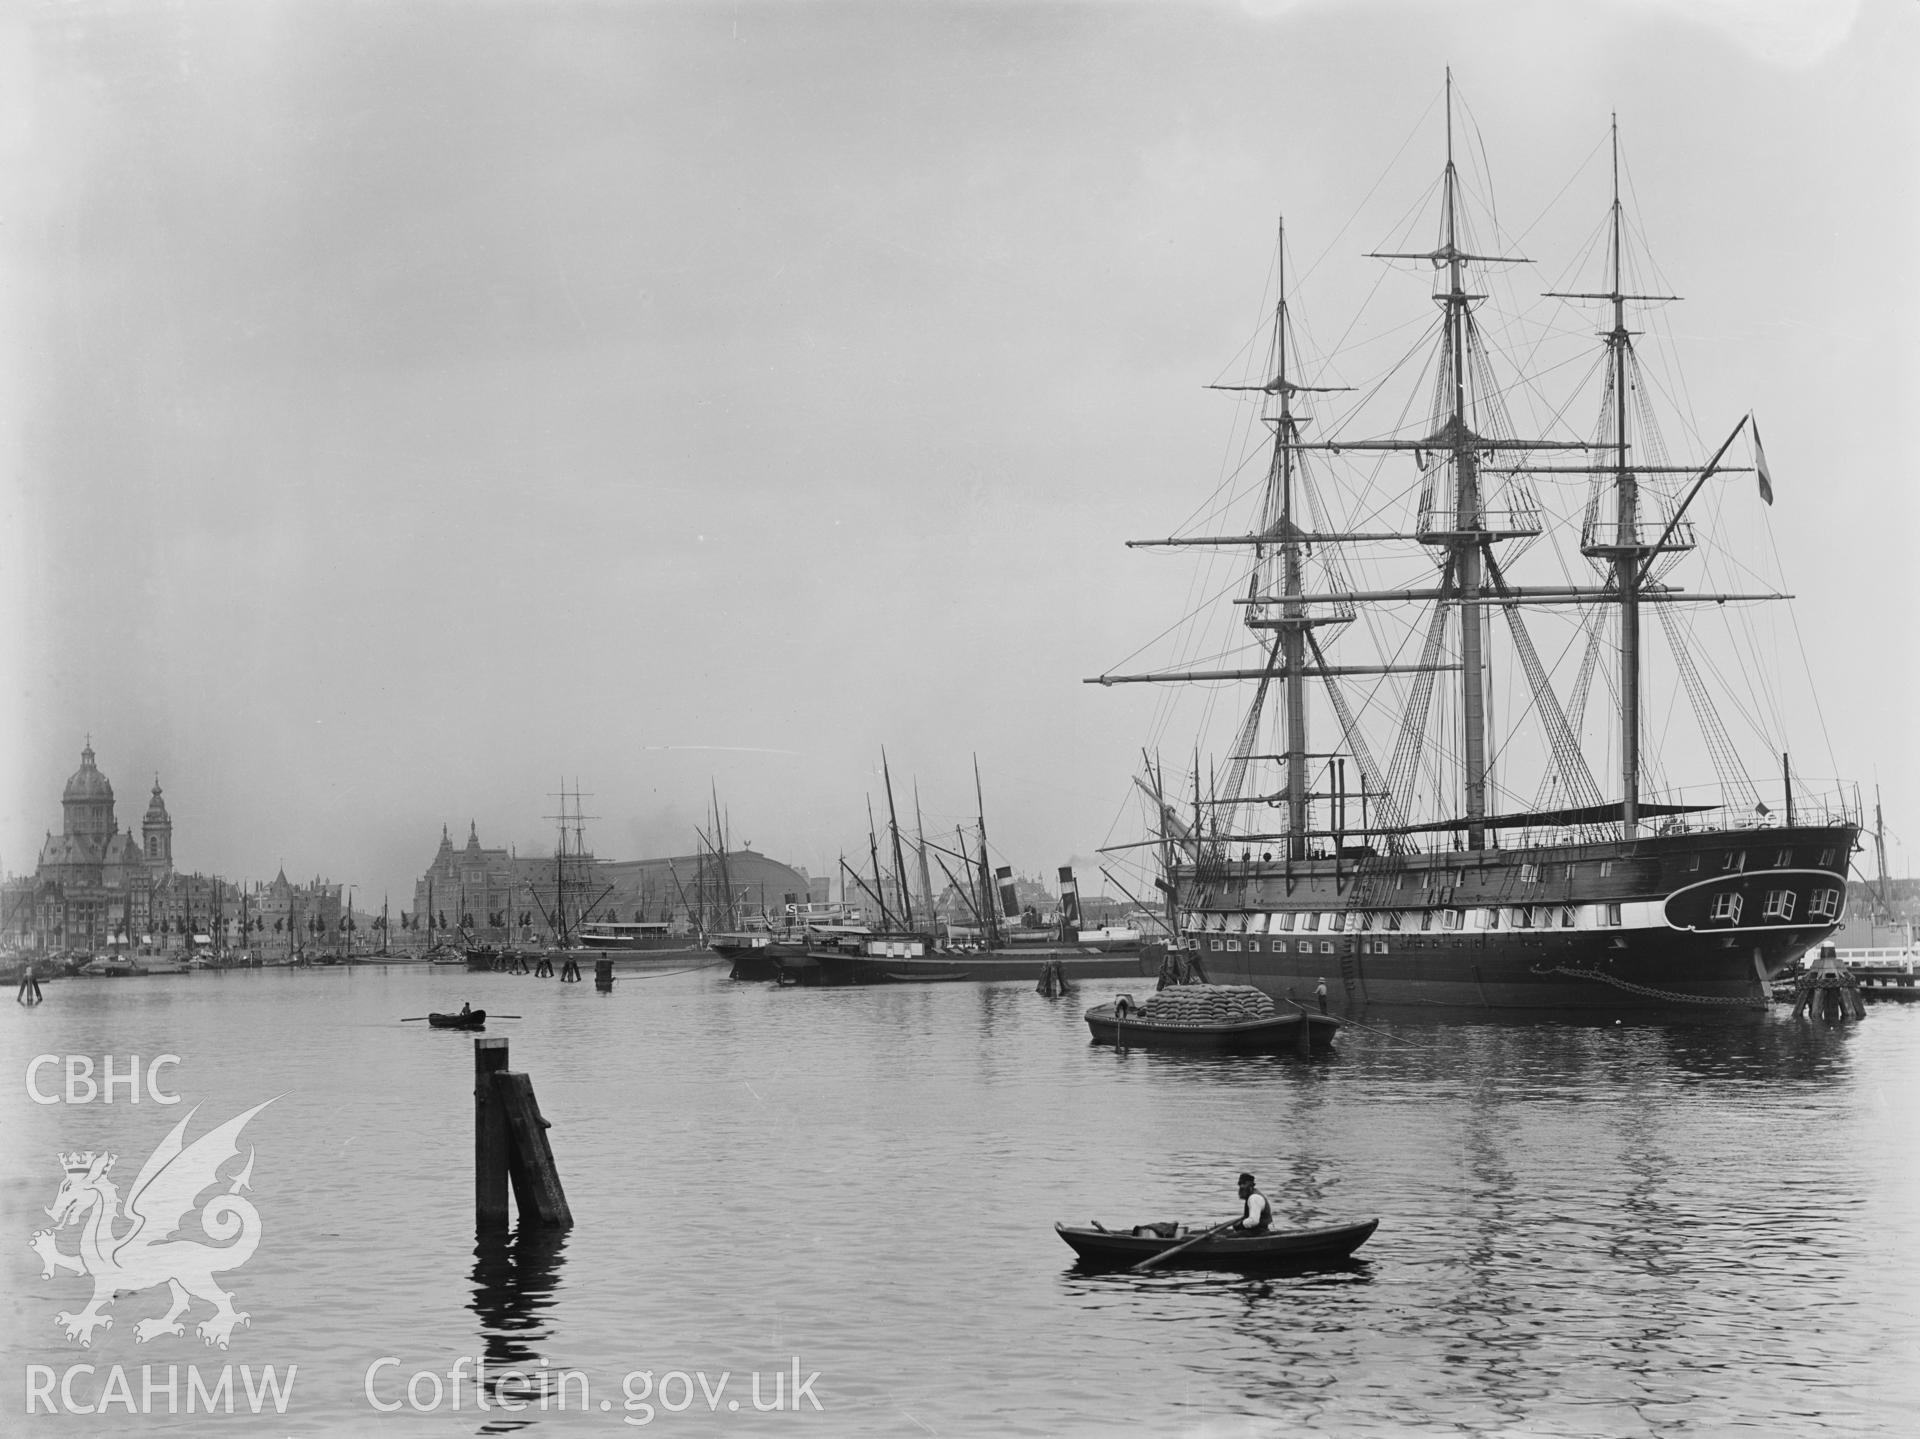 Black and white image dating from c.1910 showing a sailing ship in an unidentified port.